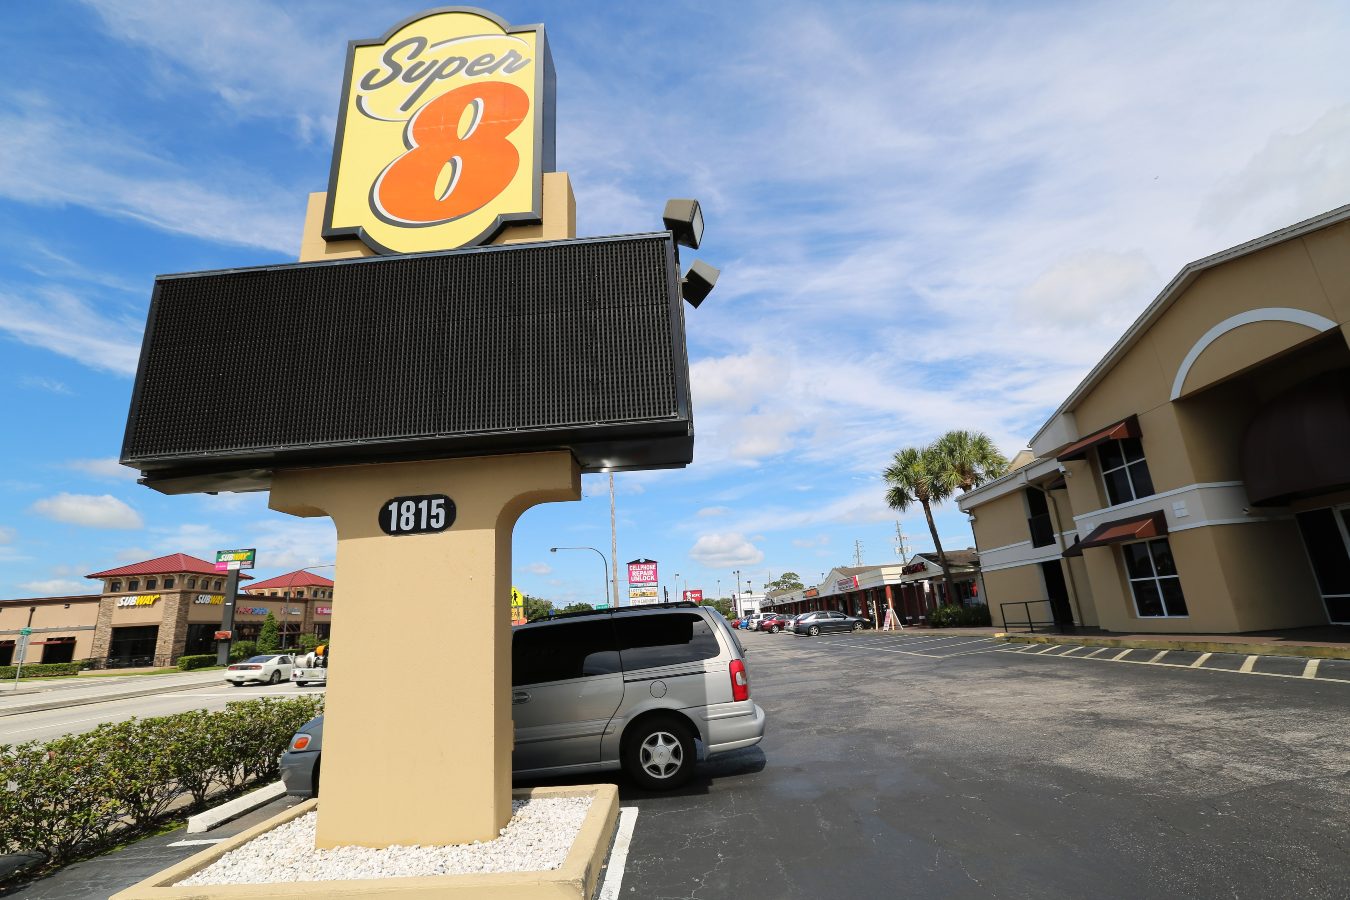 A view of a Super 8 motel sign from its parking lot on a sunny day in Kissimmee, Florida.